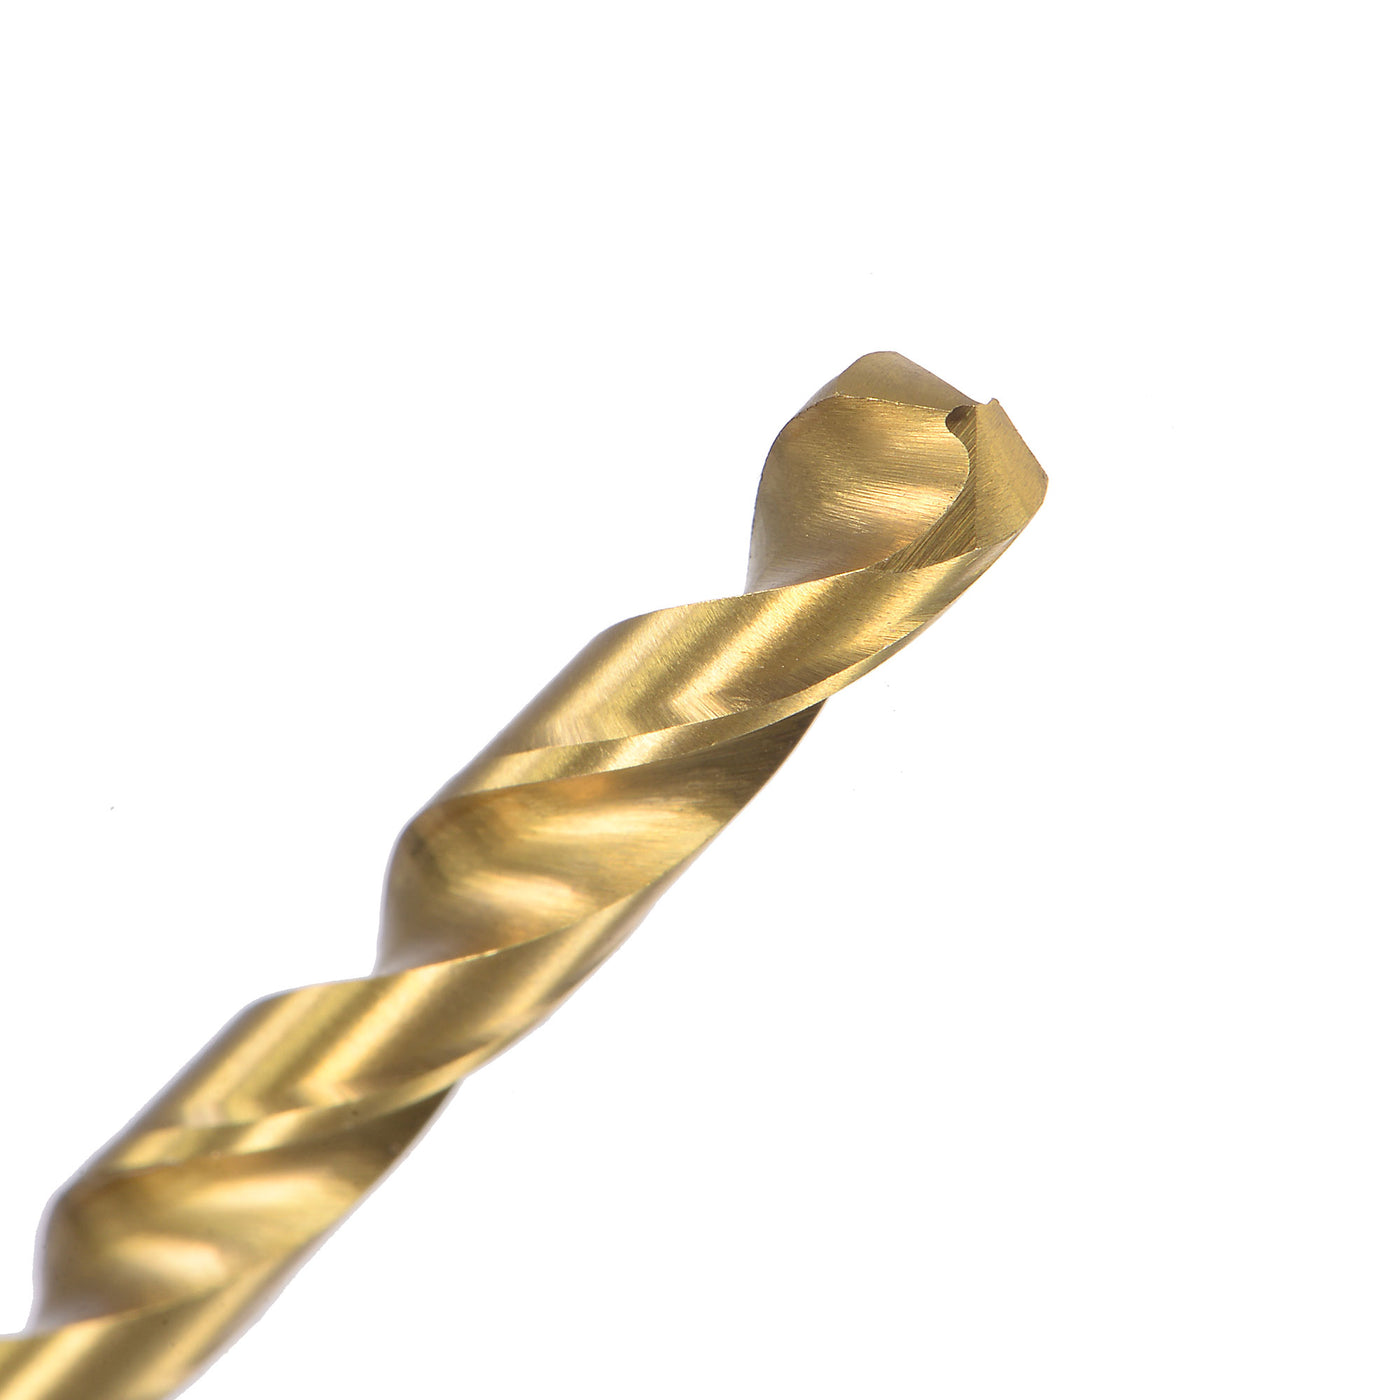 uxcell Uxcell High Speed Steel Twist Drill Bit 6.1mm Fully Ground Titanium Coated 2 Pcs